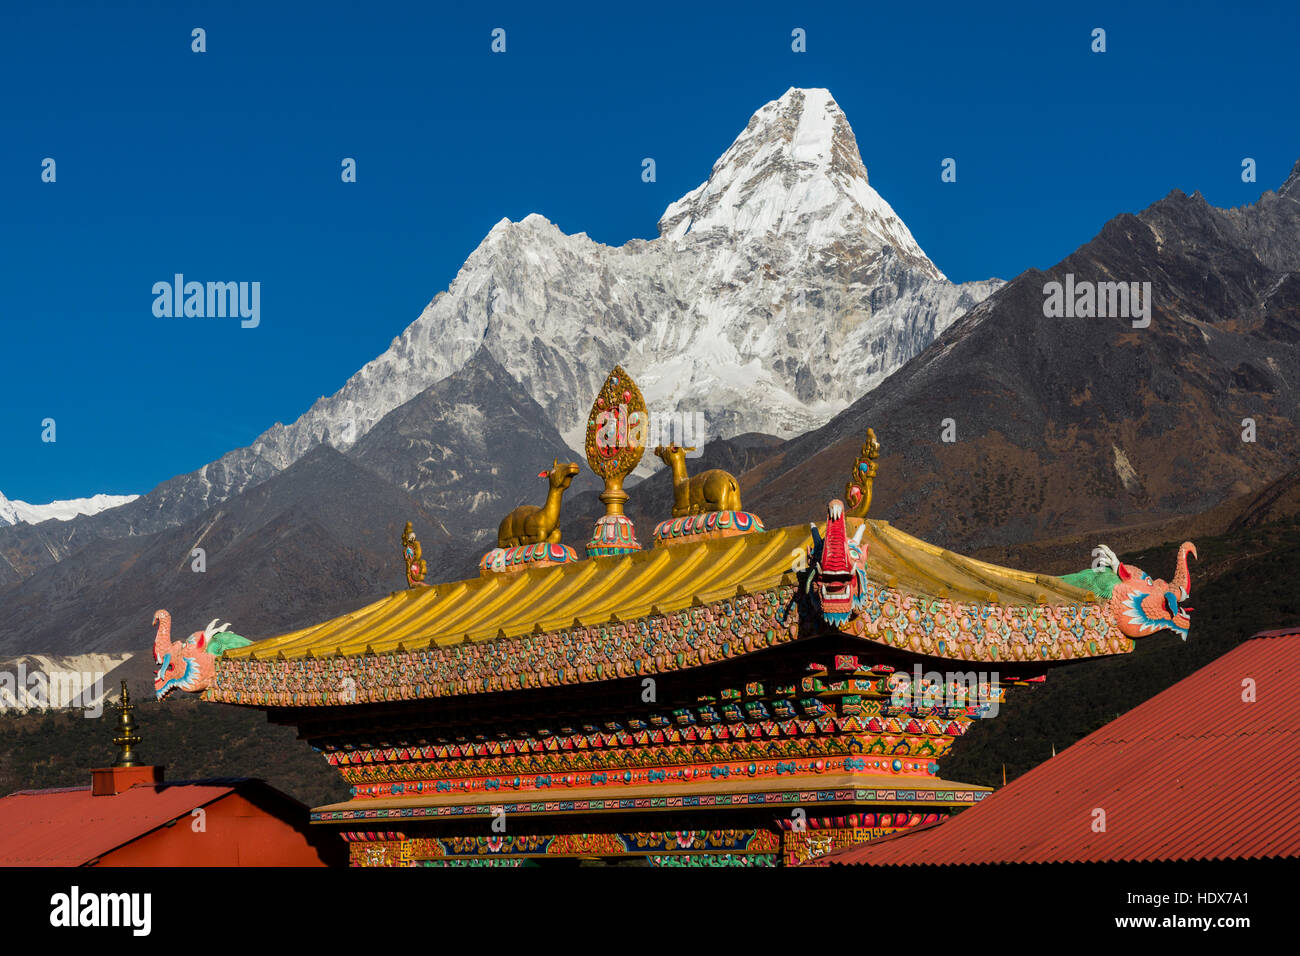 The entrance gate of the monastery Tengboche Gompa, the mountain Ama Dablam (6856m) in the distance Stock Photo